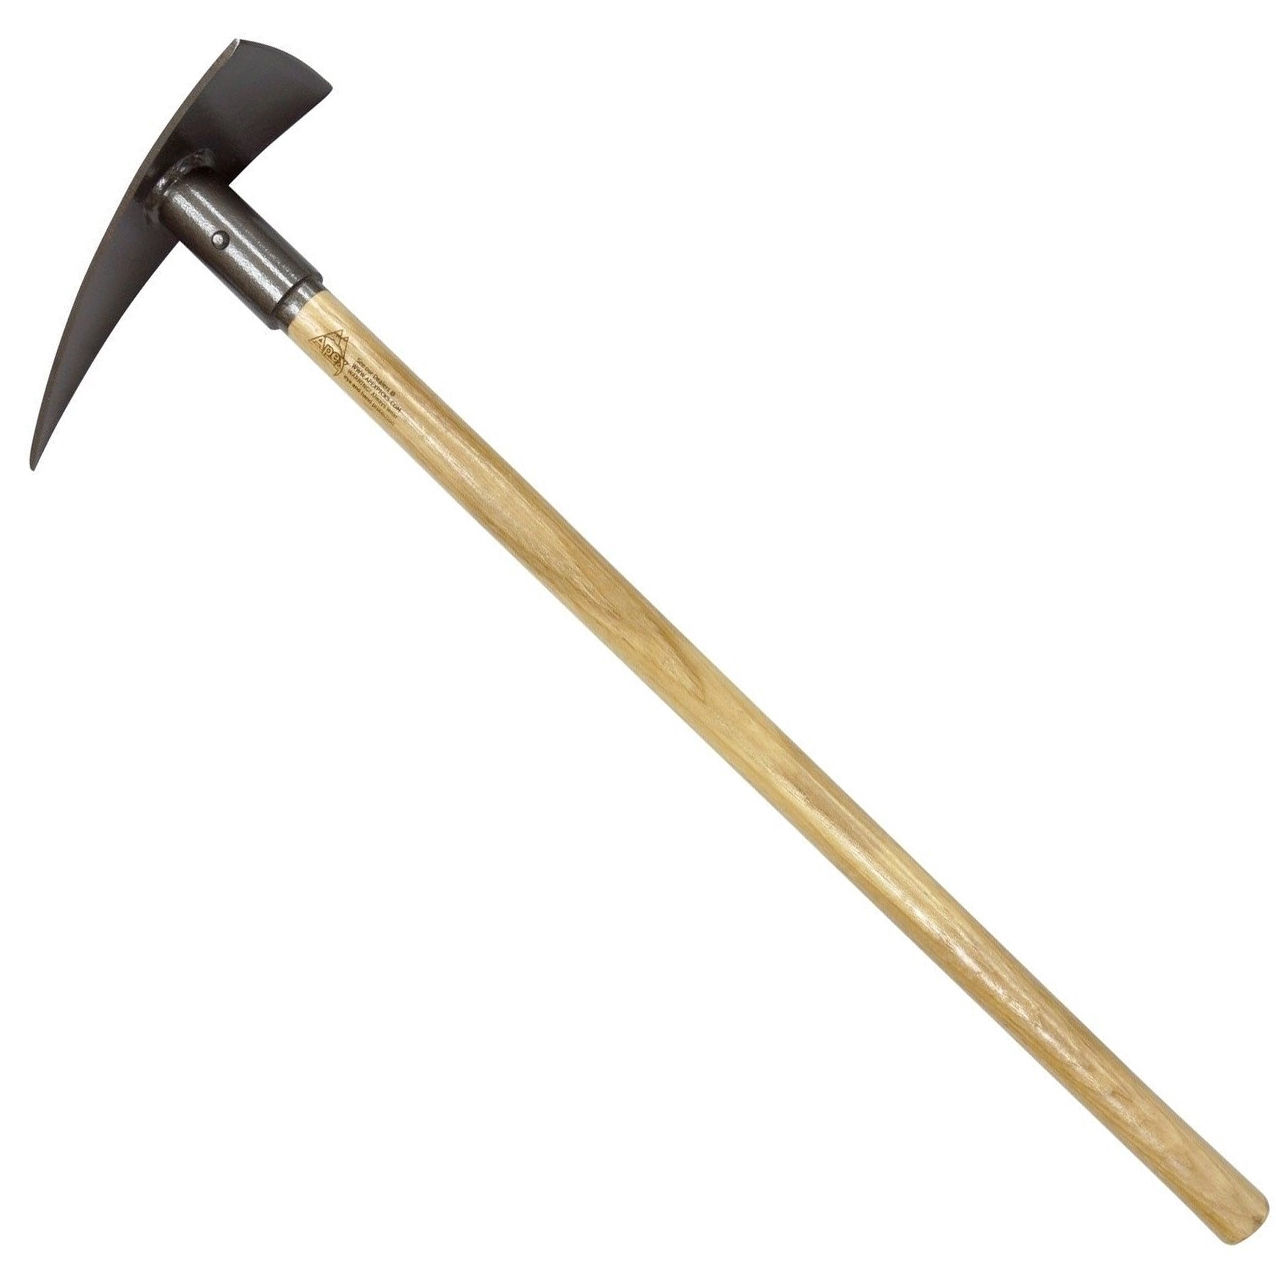 Apex Tools Apex Pick Talon 36" Length Hickory Handle with Solid Steel Head 4.5" x 12"